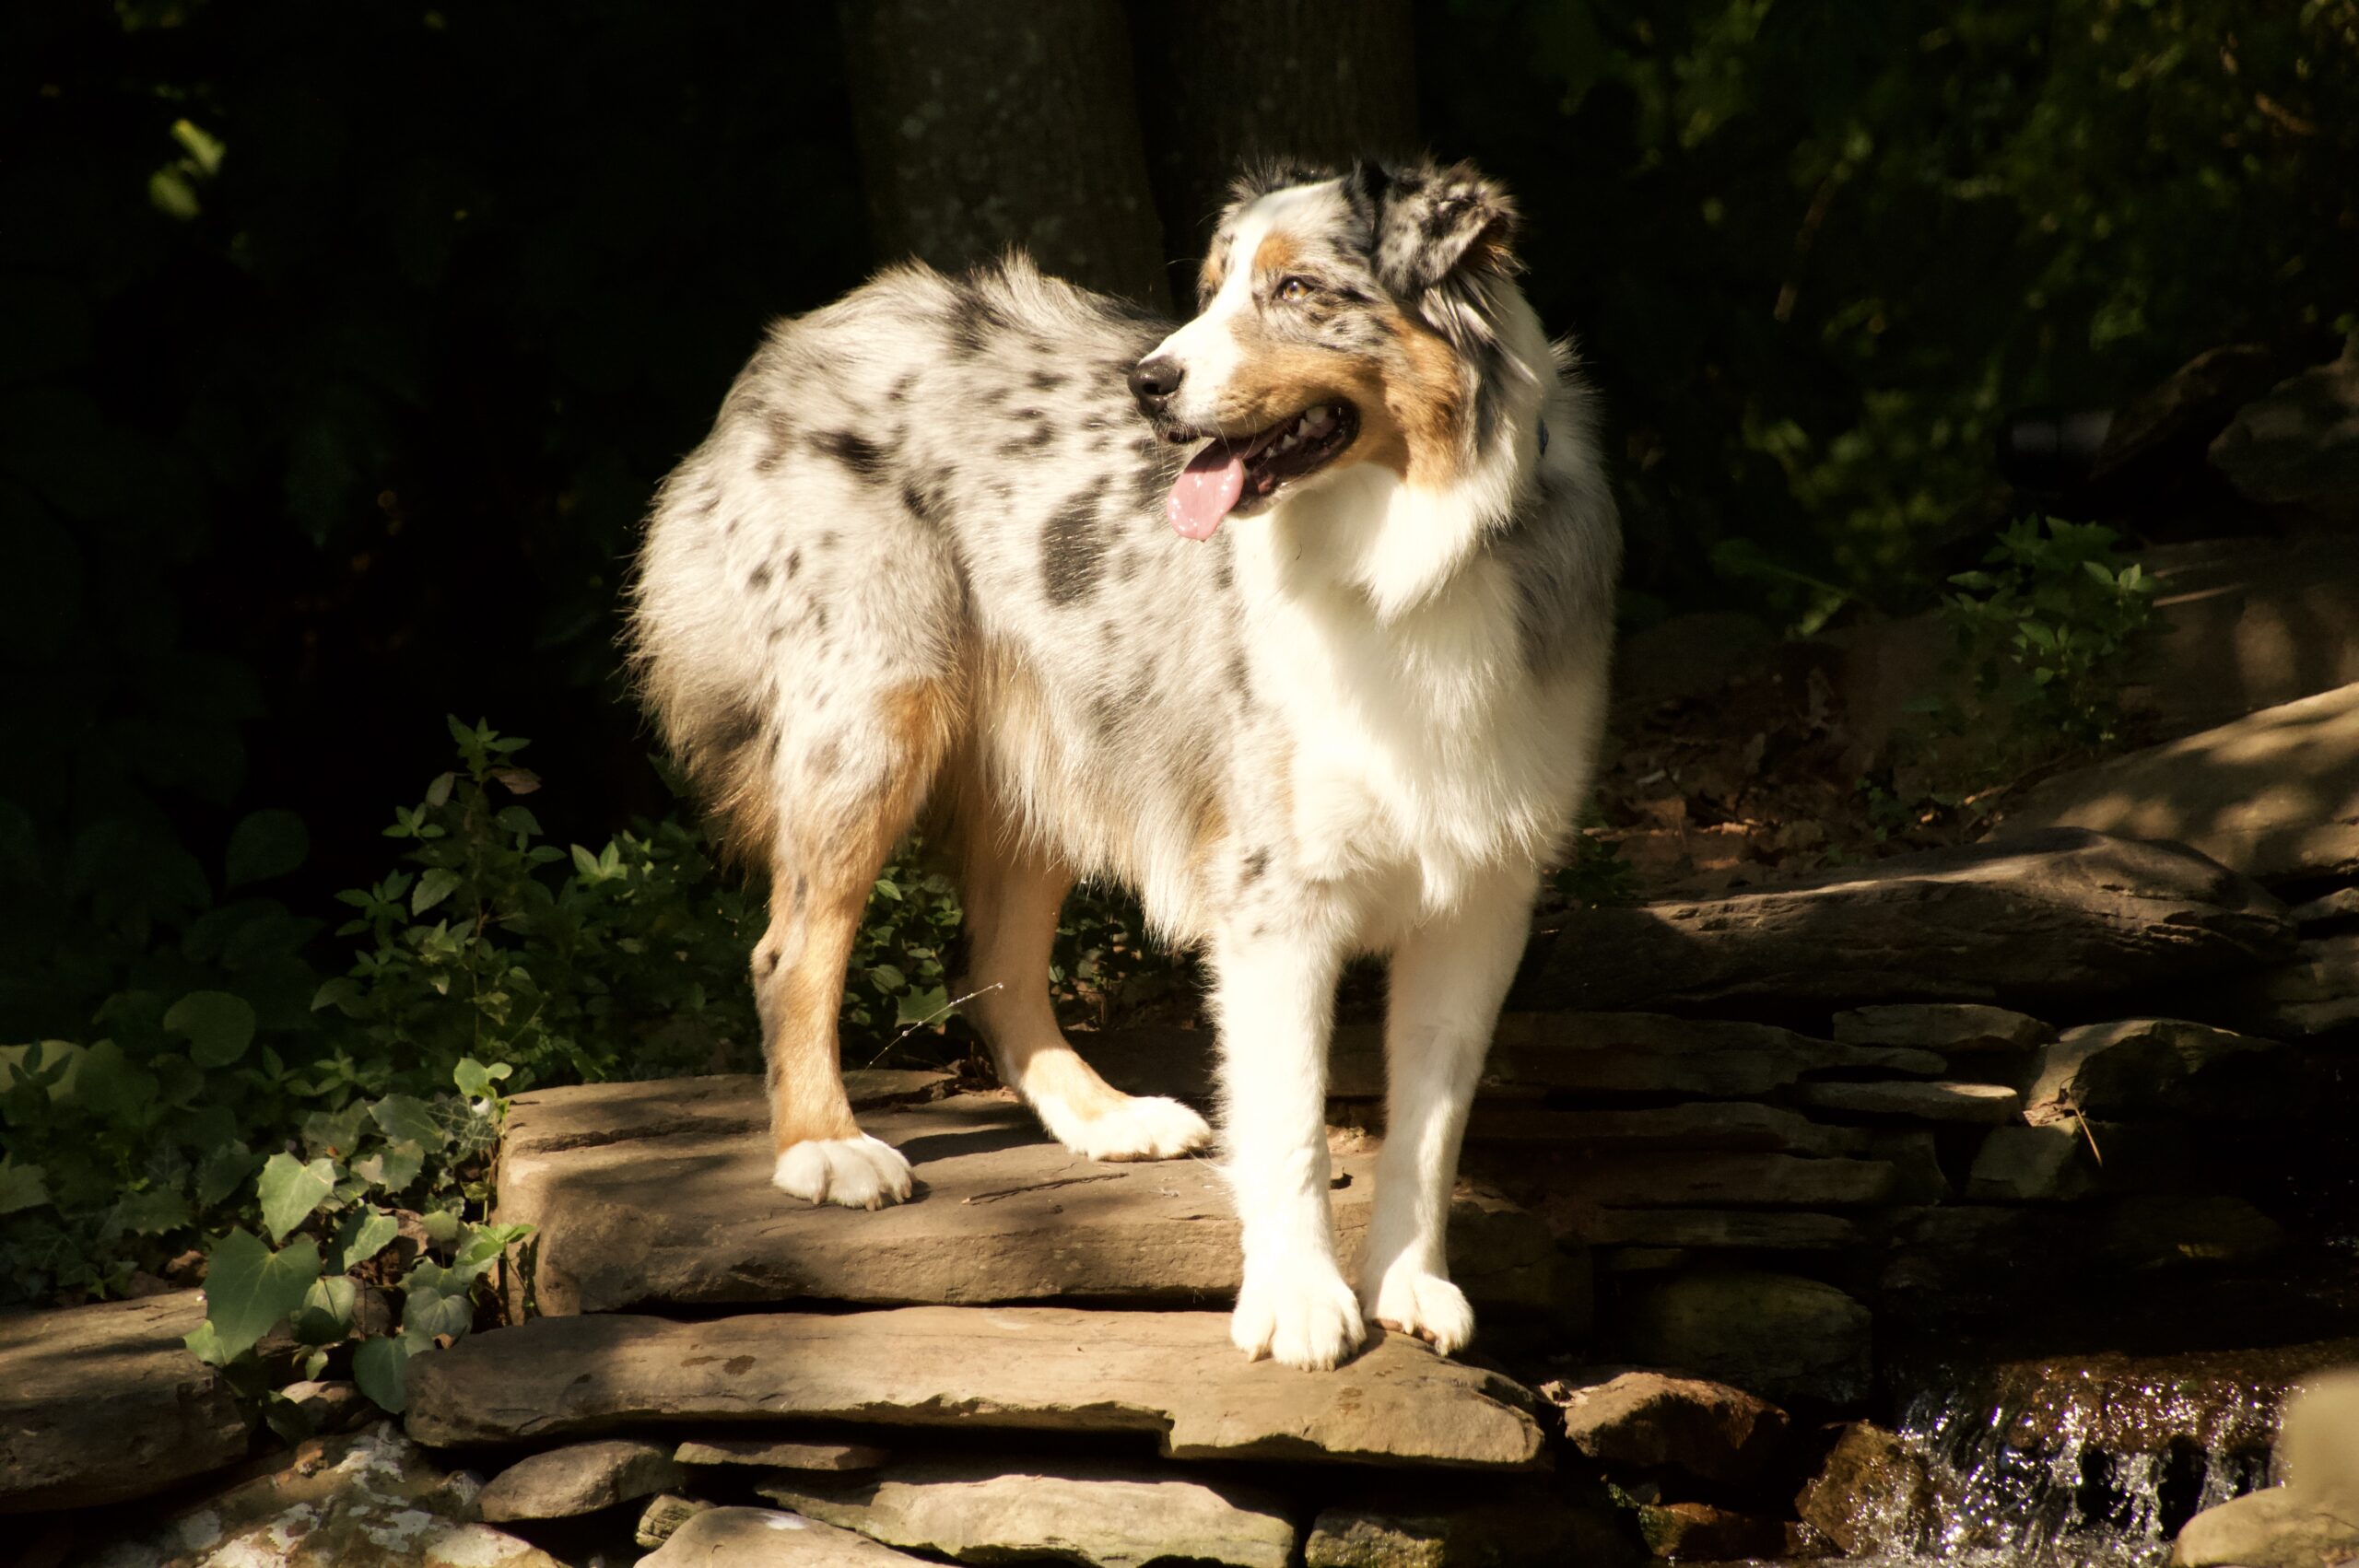 Australian shepherd in the sun, standing, looking to the left, on a set of rocks that line a waterfall.